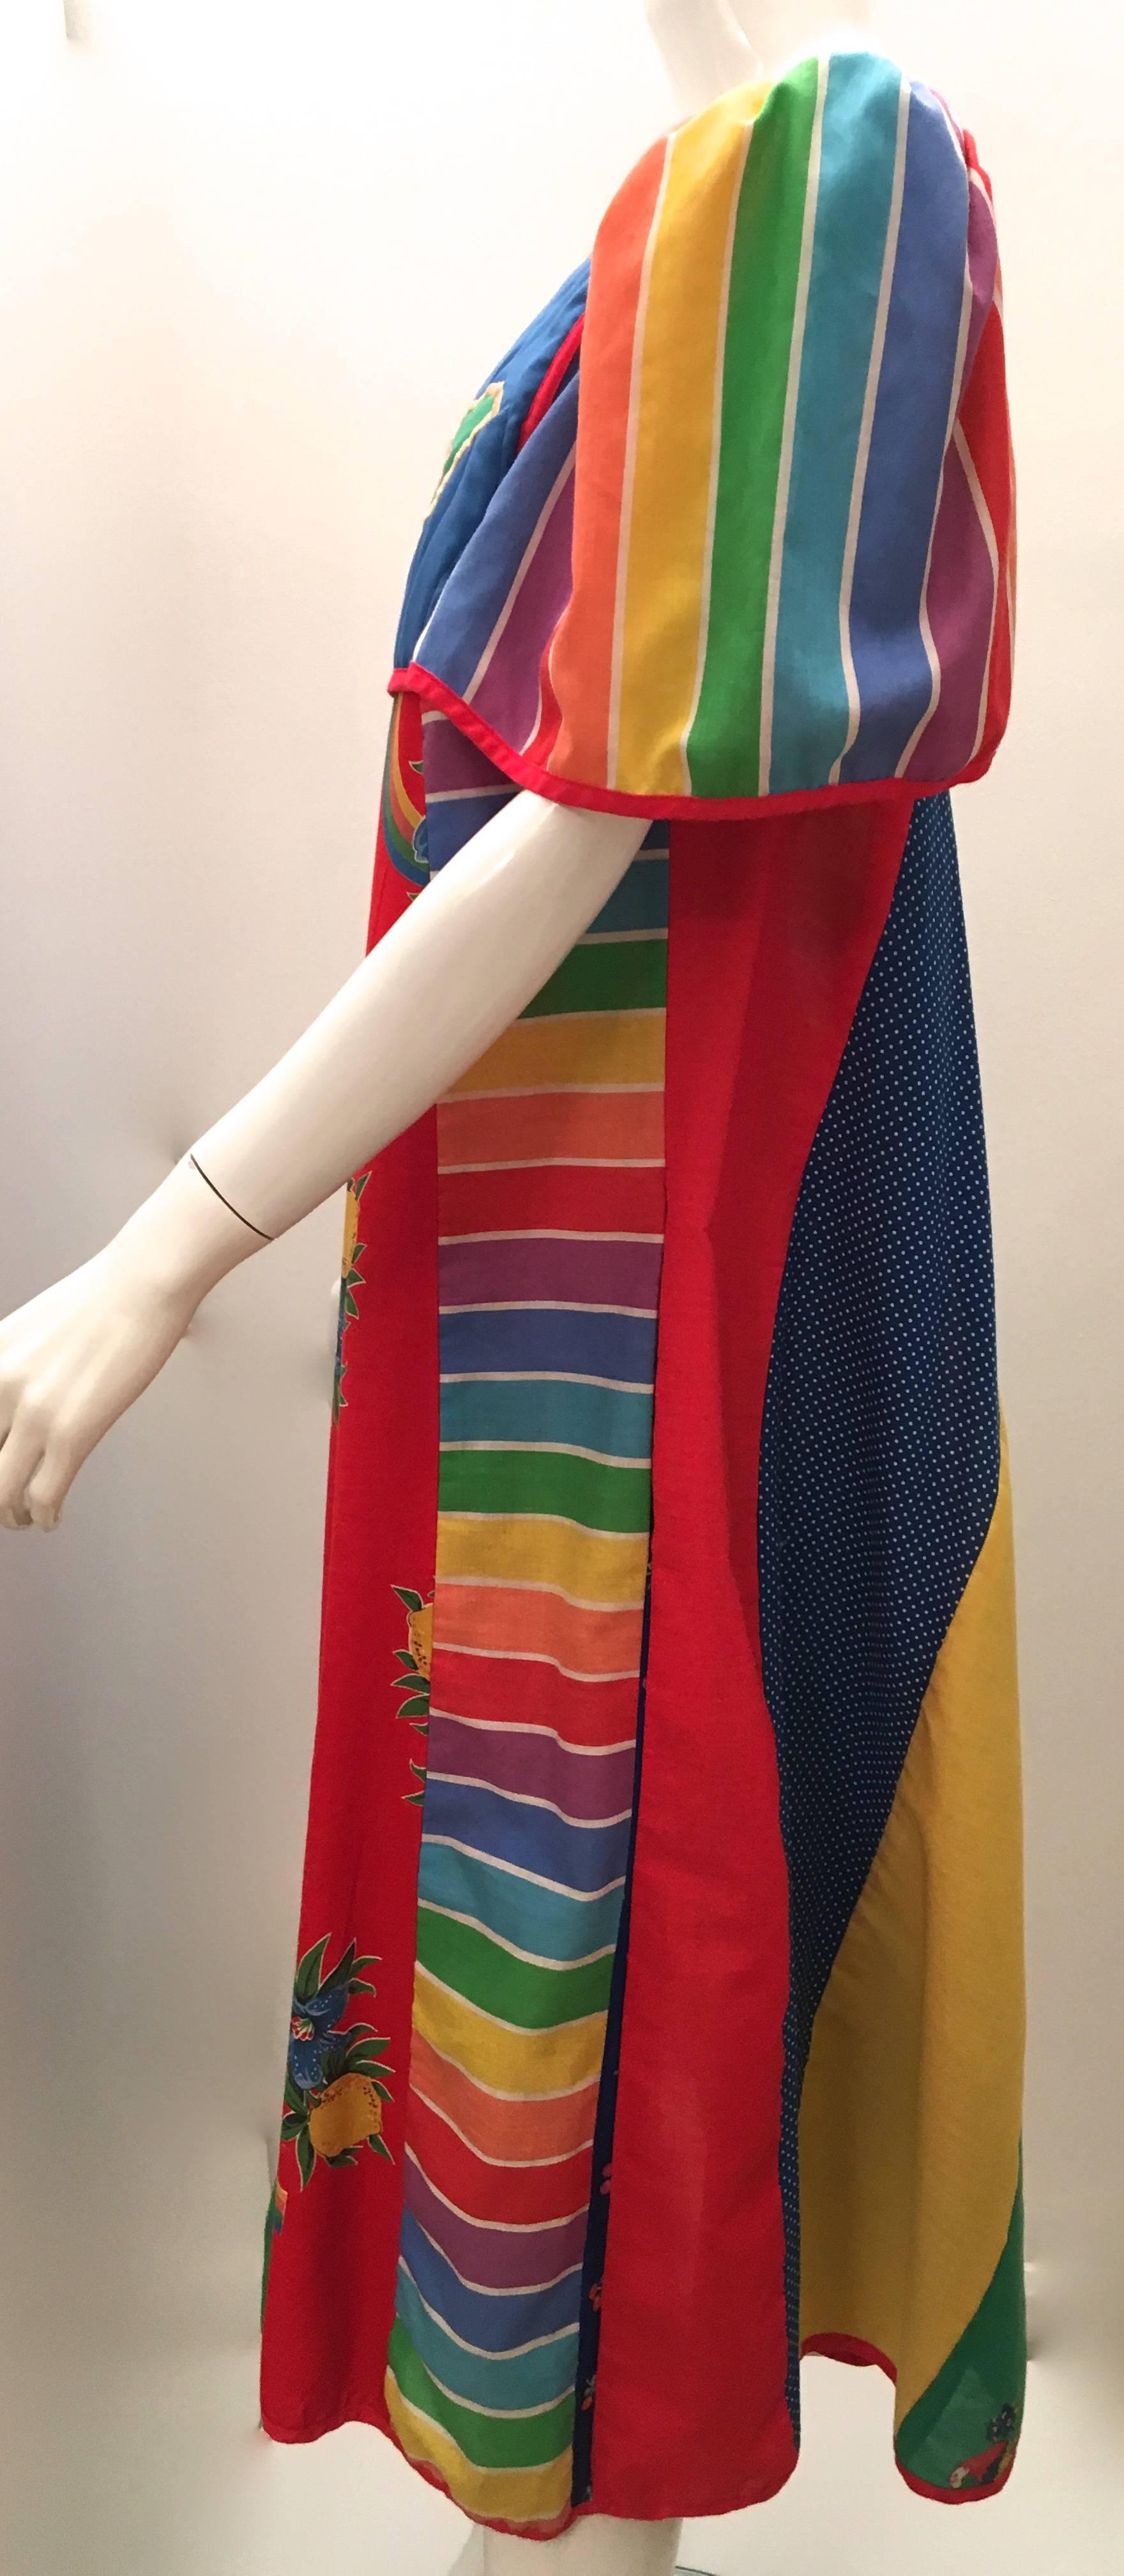 This colorful Jeanne Marc from Saks Fifth Avenue is a beautiful example of Jeanne Marc's designs. It is from the 1980's and was purchased at Saks Fifth Avenue. It has never been worn and it has been in my collection since it was purchased. The